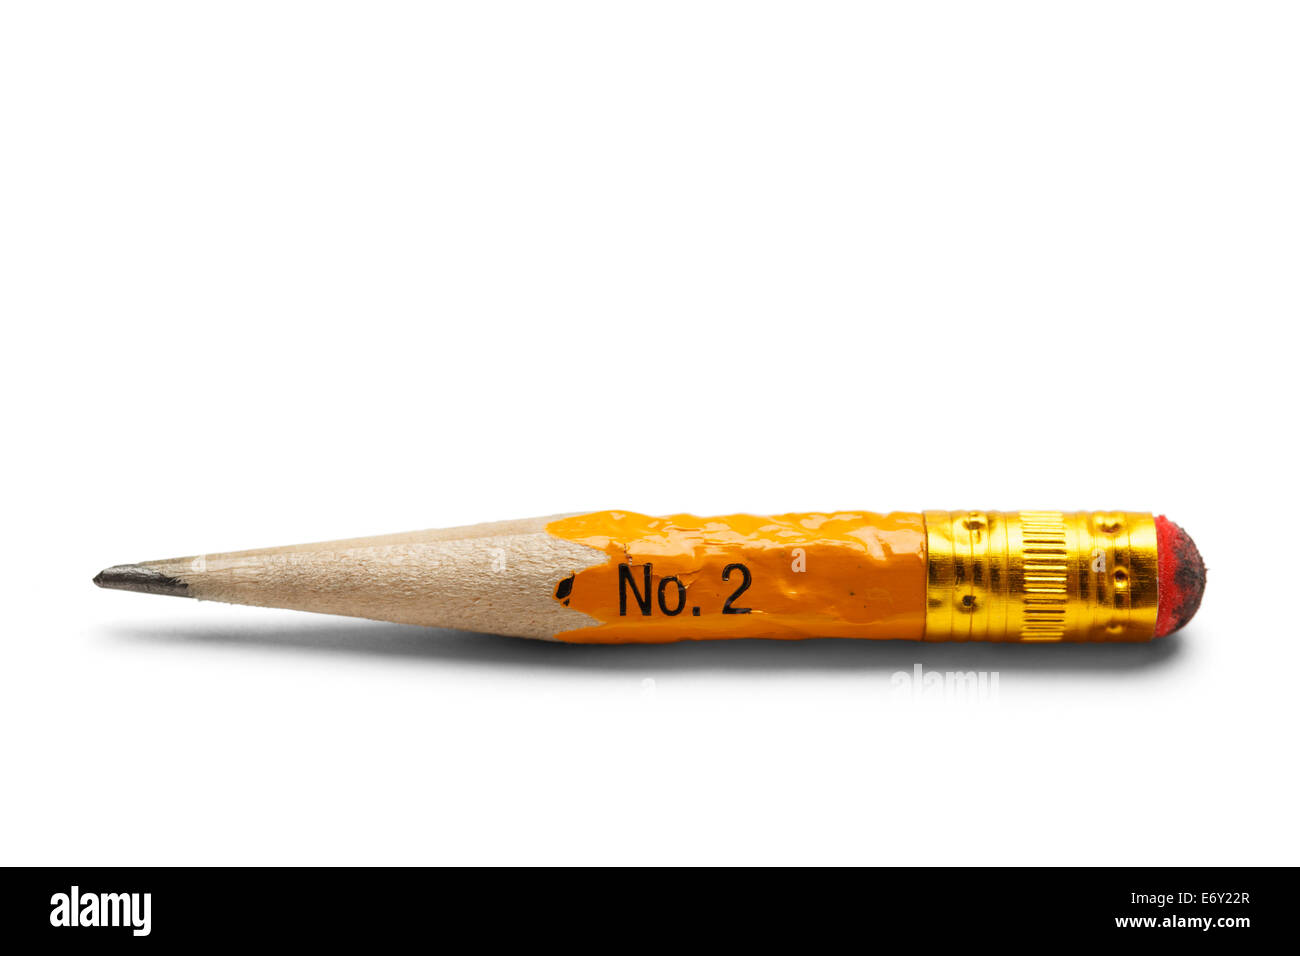 Small Number Two Pencil with Worn Eraser and White Marks Isolated on White Background. Stock Photo